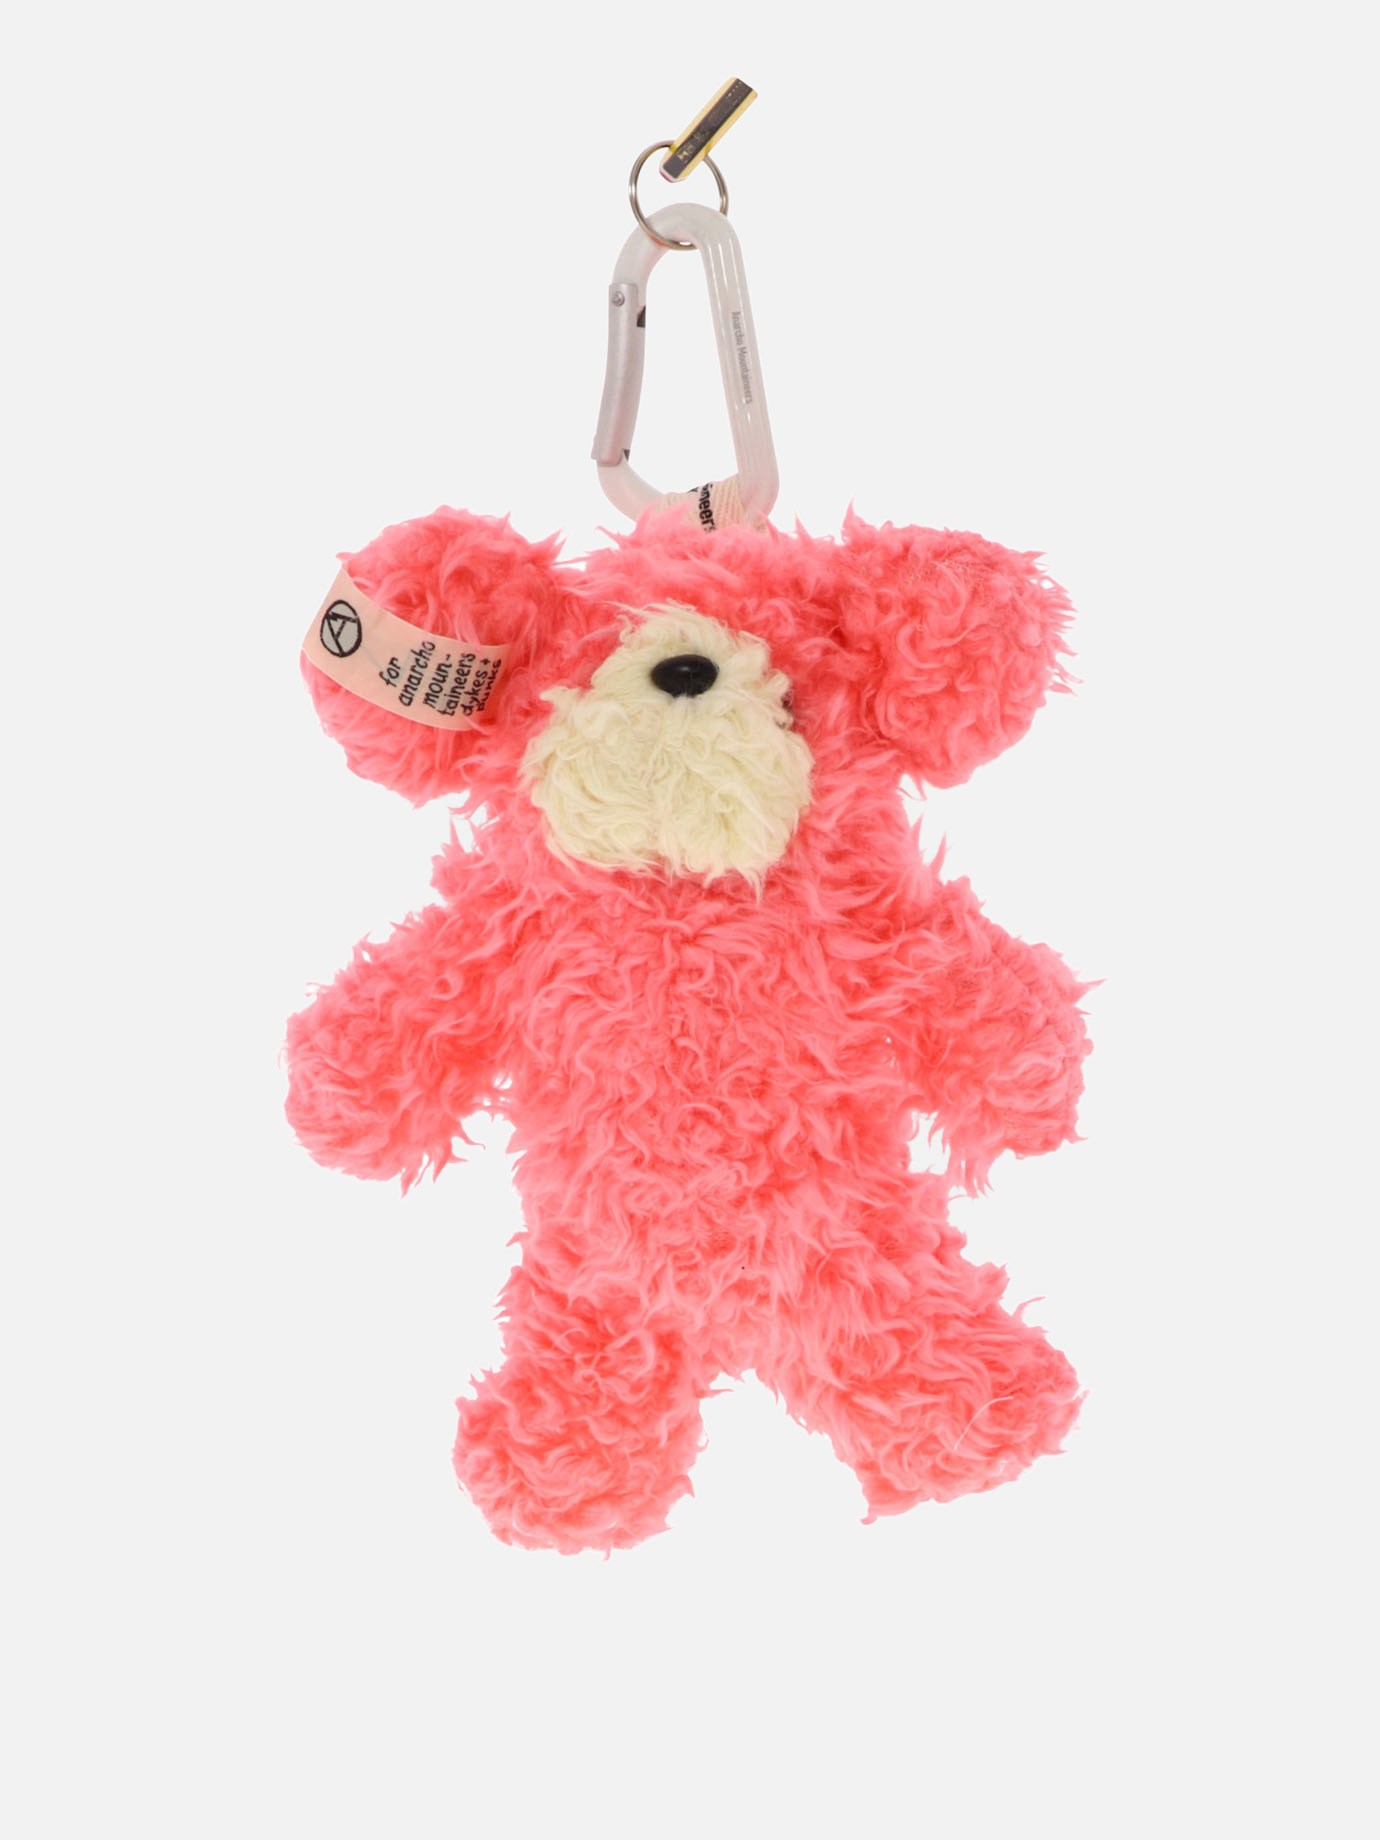  MIC Bear  keychainby Mountain Research - 3